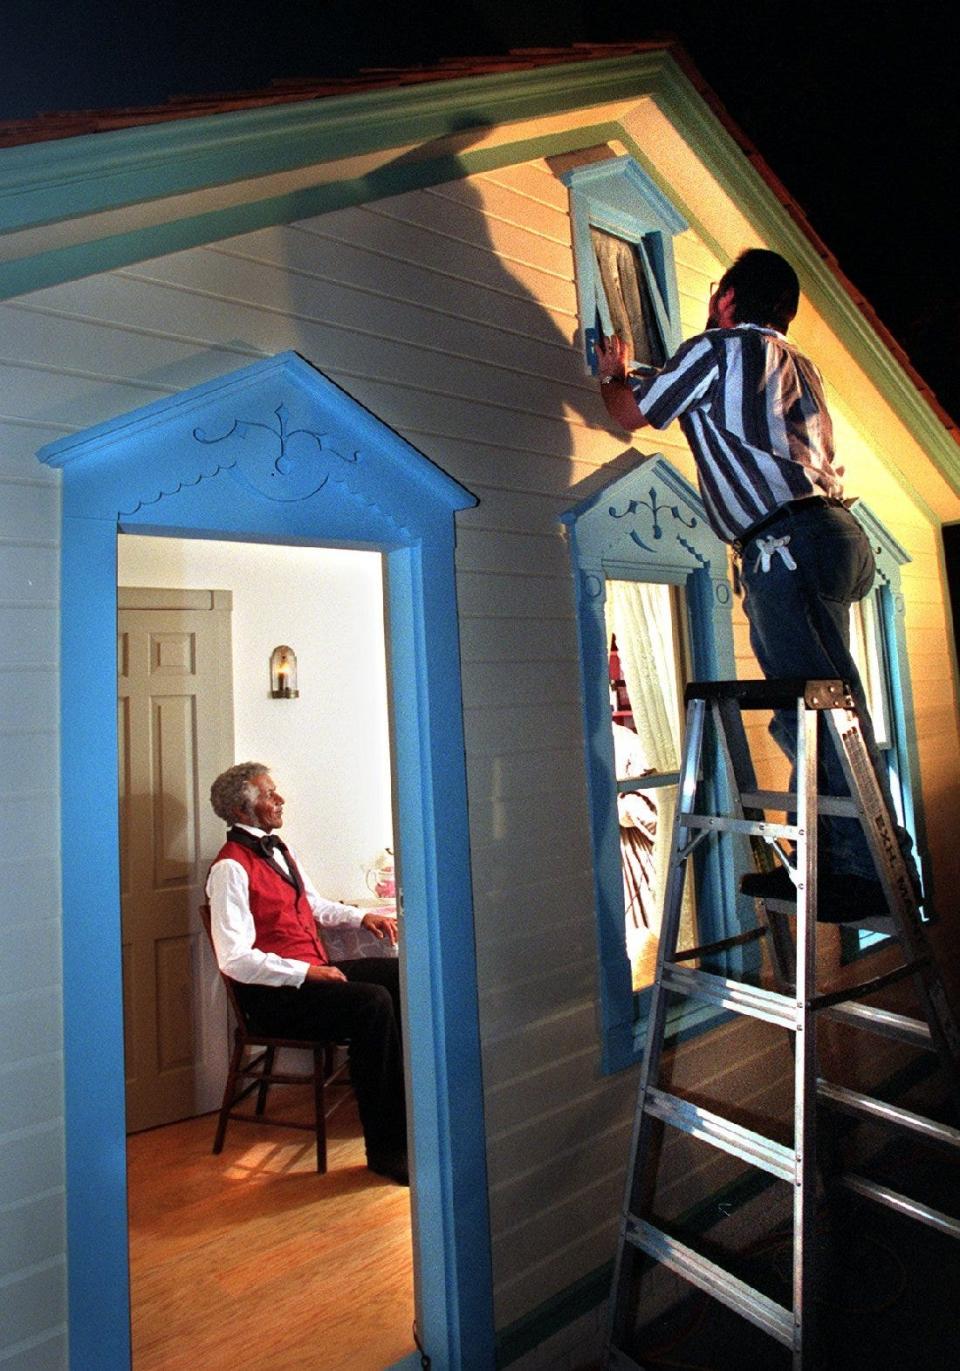 Mike Jeske, project designer for the new Watson Family House at the Milwaukee Public Museum, checks the fit of an upper window shortly before the exhibit, an addition to the Streets of Old Milwaukee, opened in February 2000.